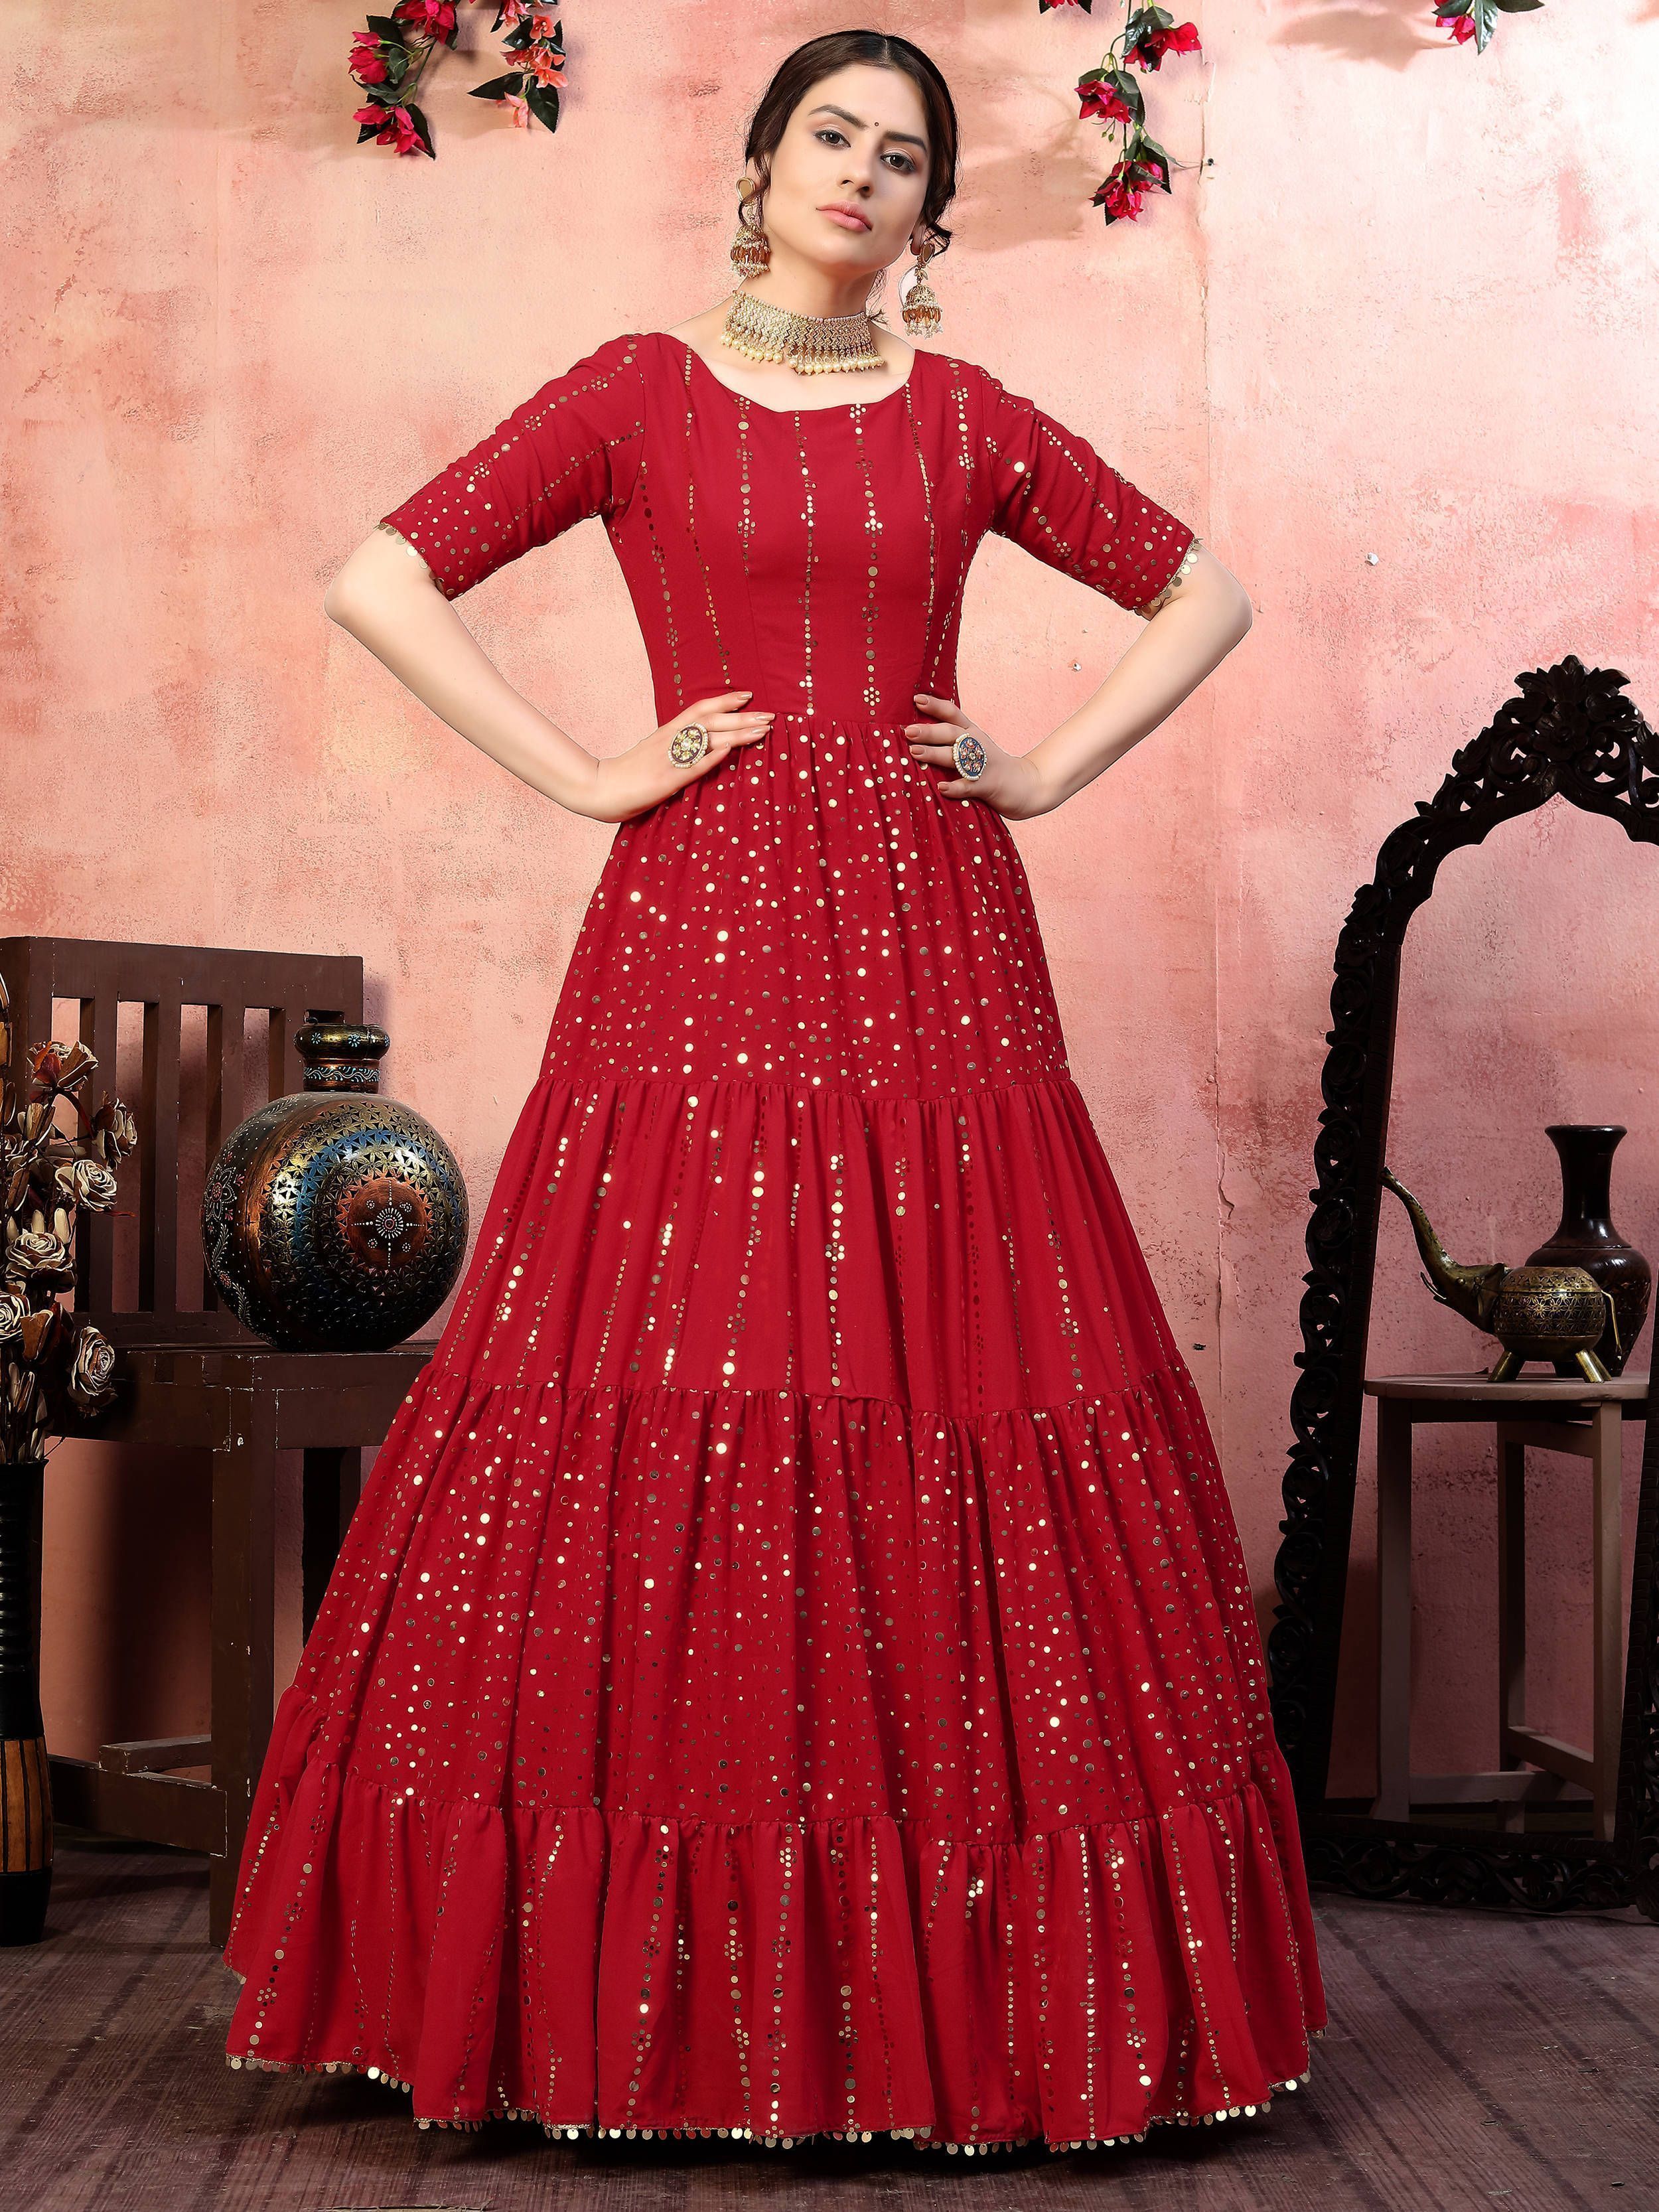 Buy Red Gown Dress Red Prom Dress Women Red Tulle Gown Online in India   Etsy